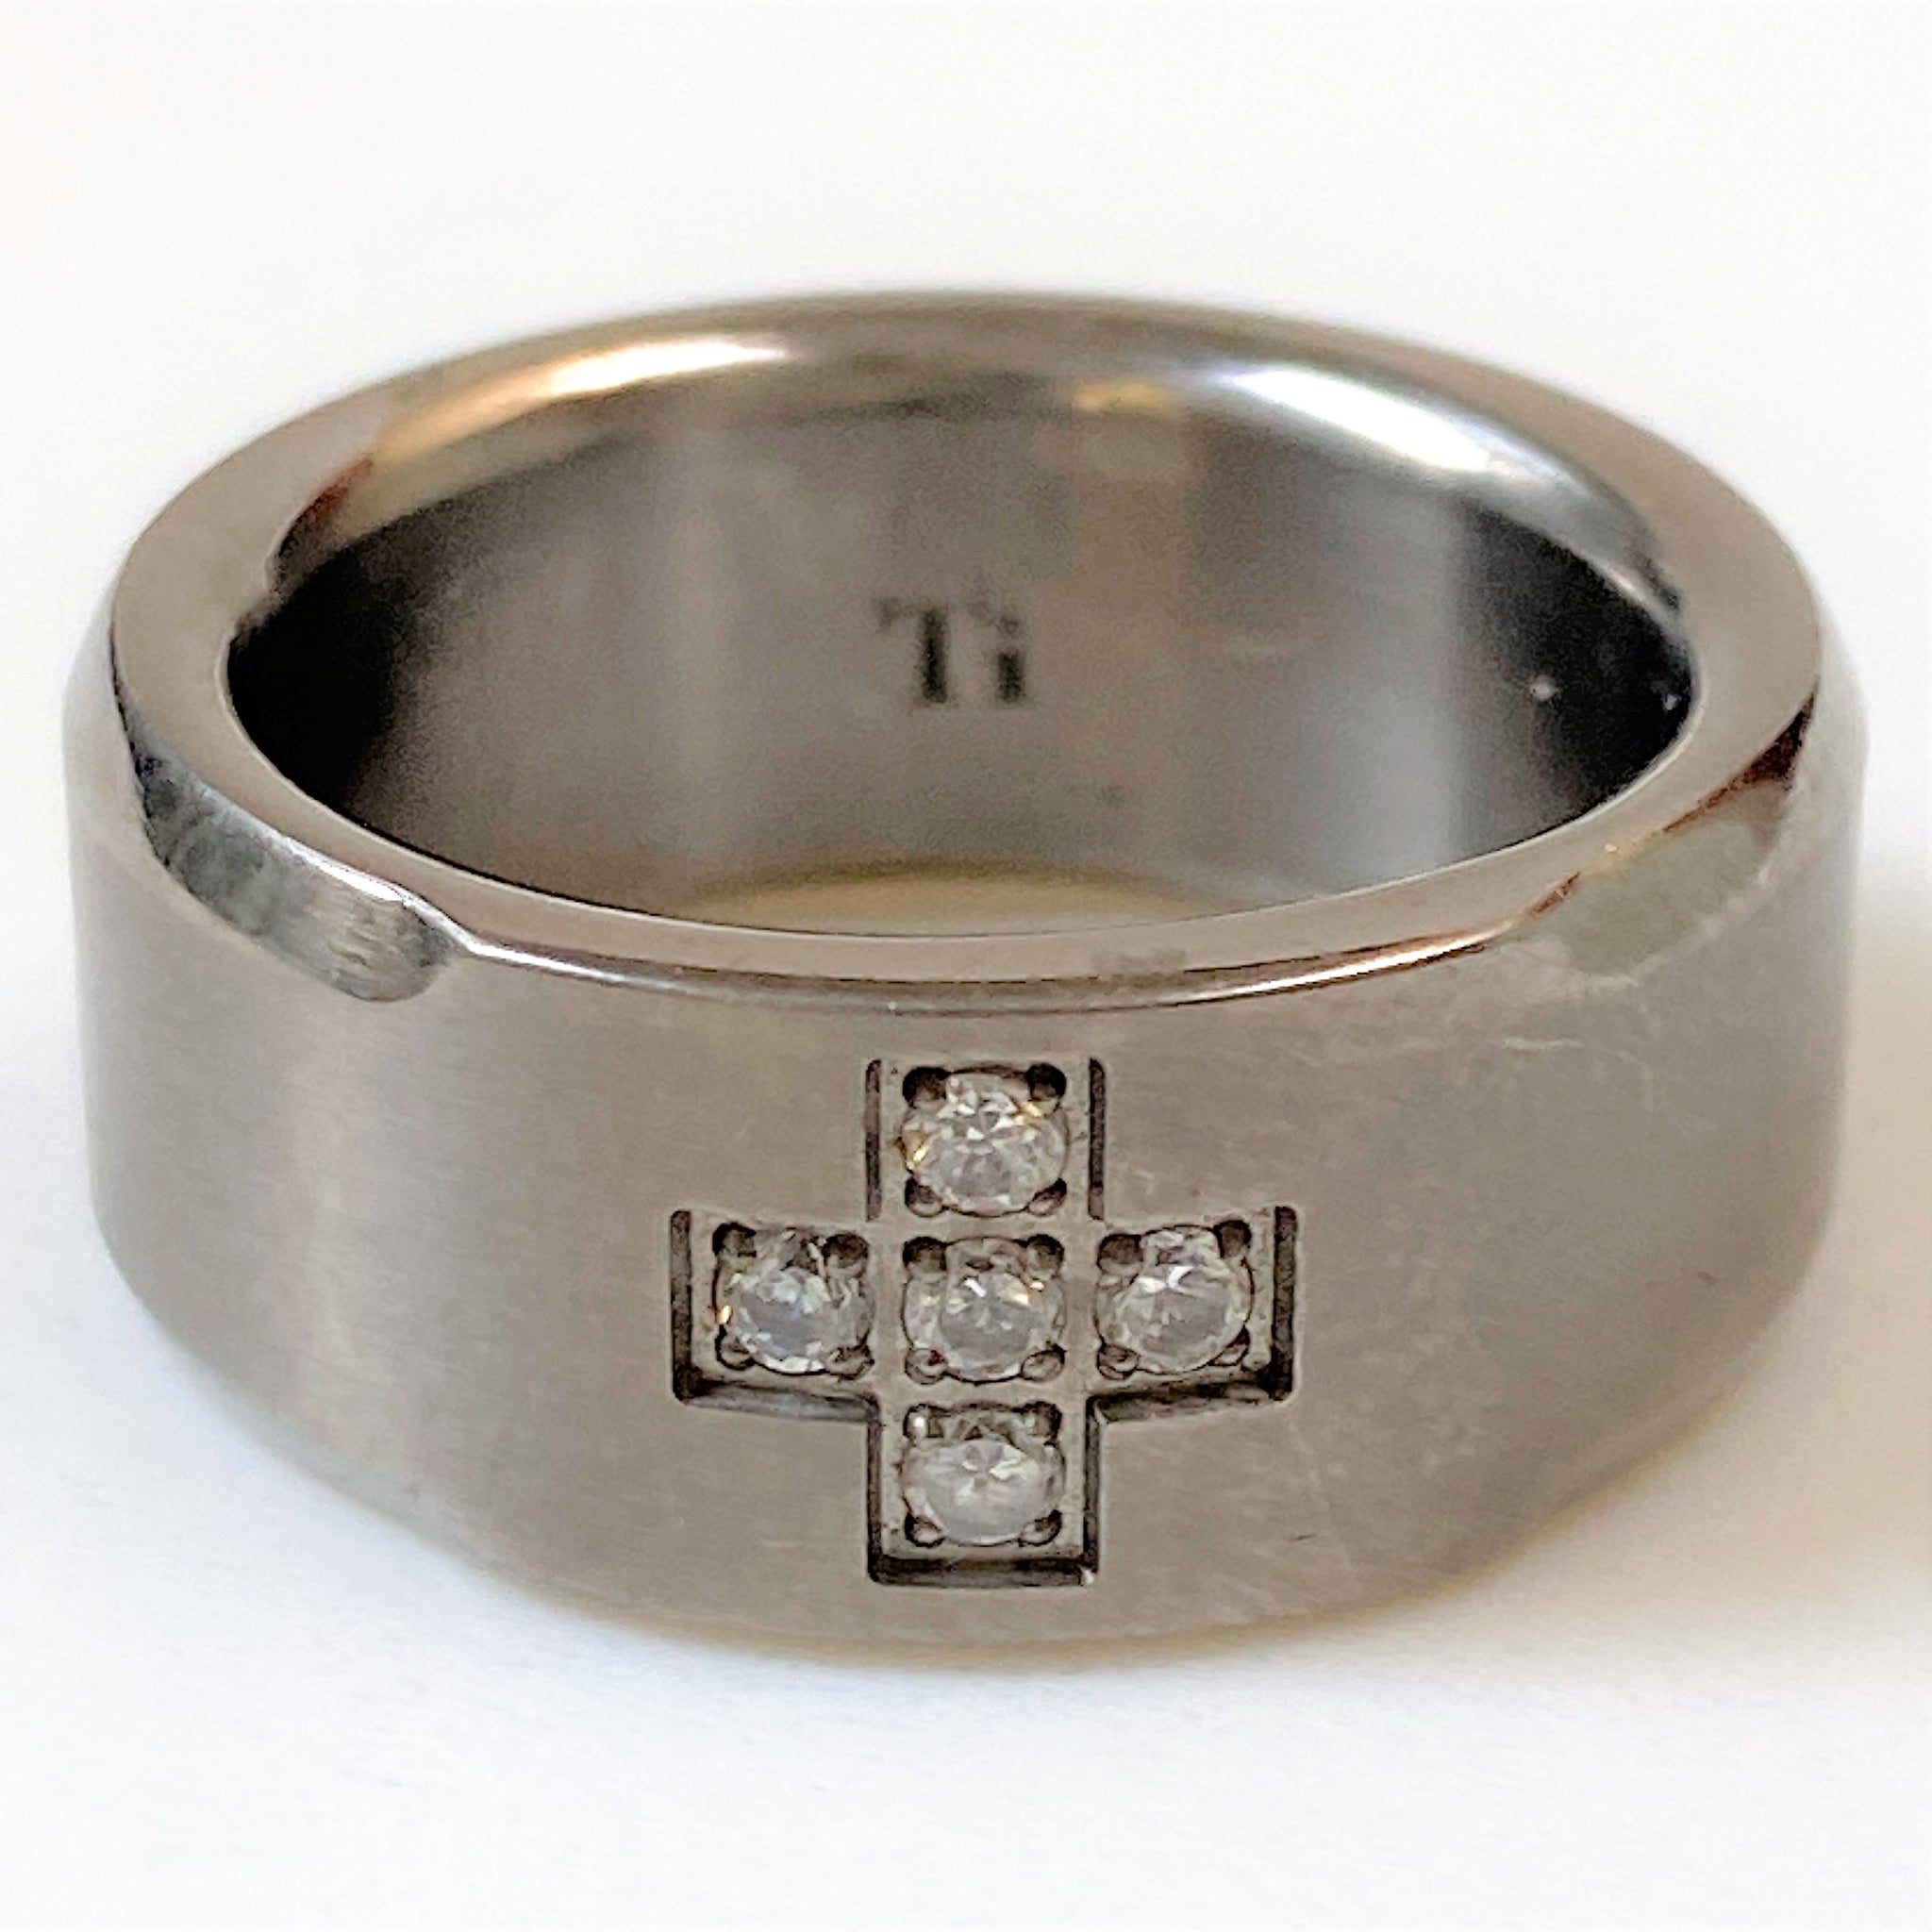 Titanium Man’s Ring with Crystal Cross